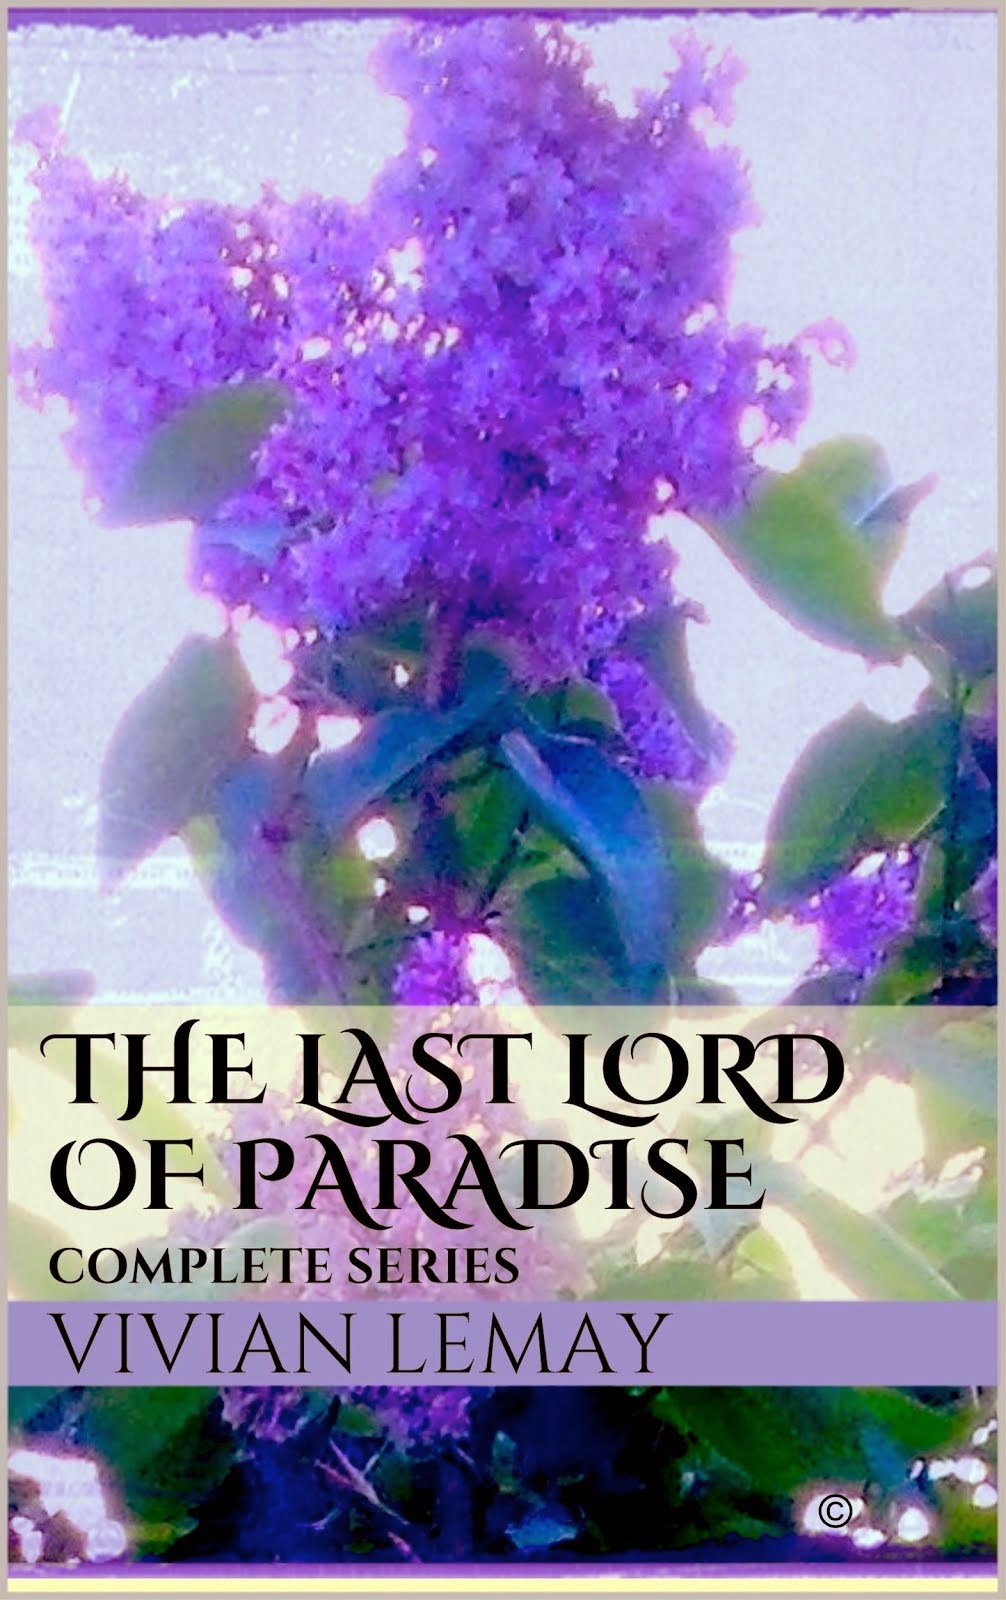 THE LAST LORD OF PARADISE, Complete Series